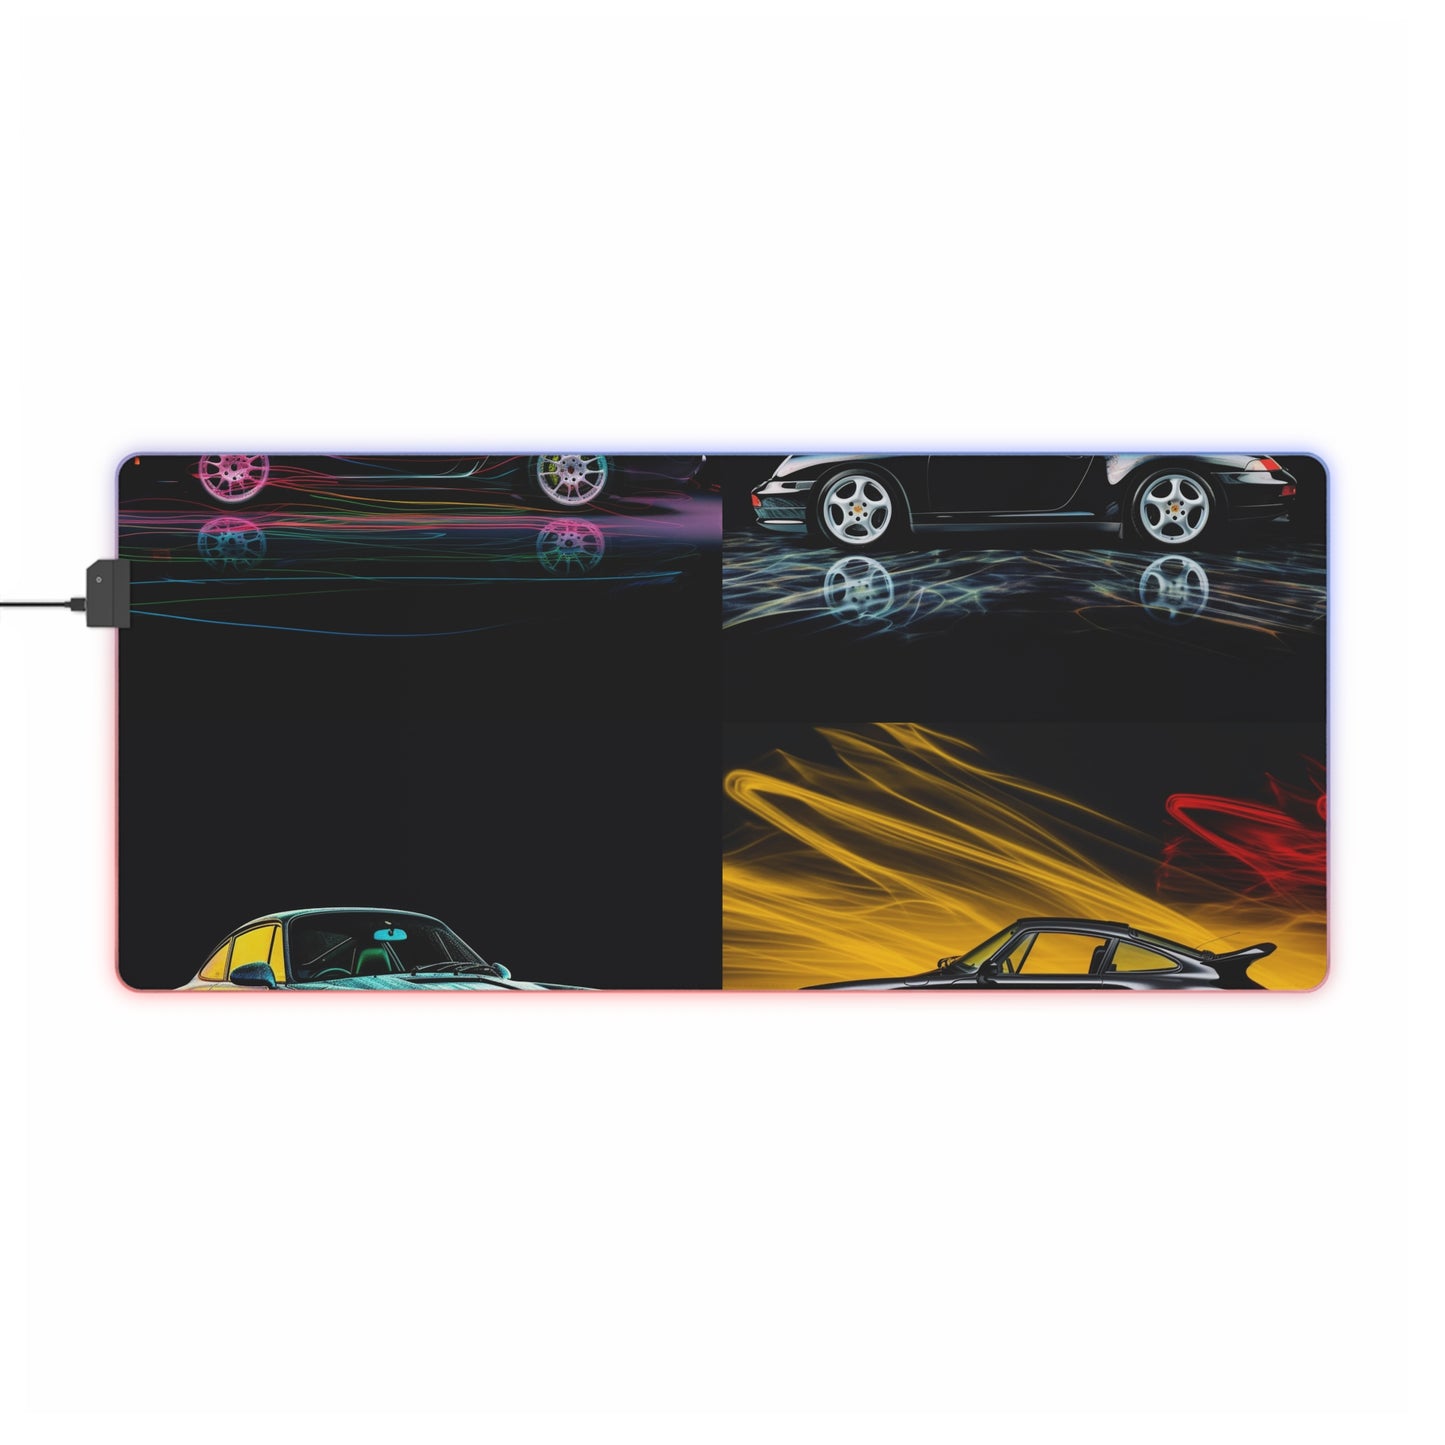 LED Gaming Mouse Pad Porsche 933 5